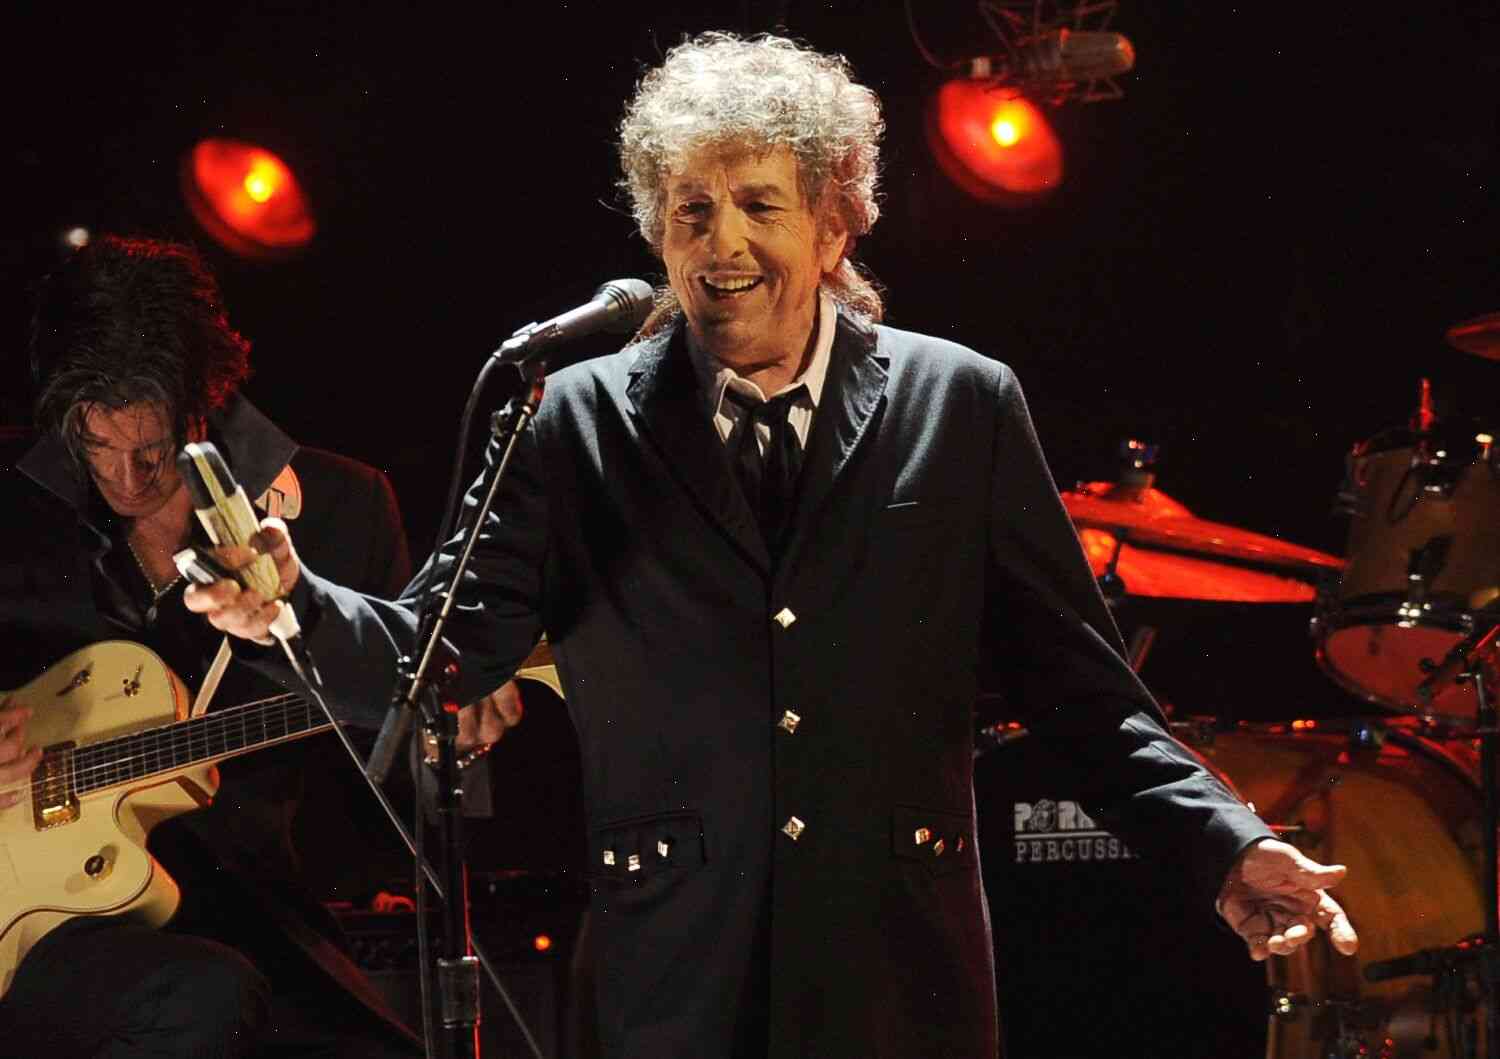 HarperCollins Gives Bob Dylan a Free Advance of $10,000